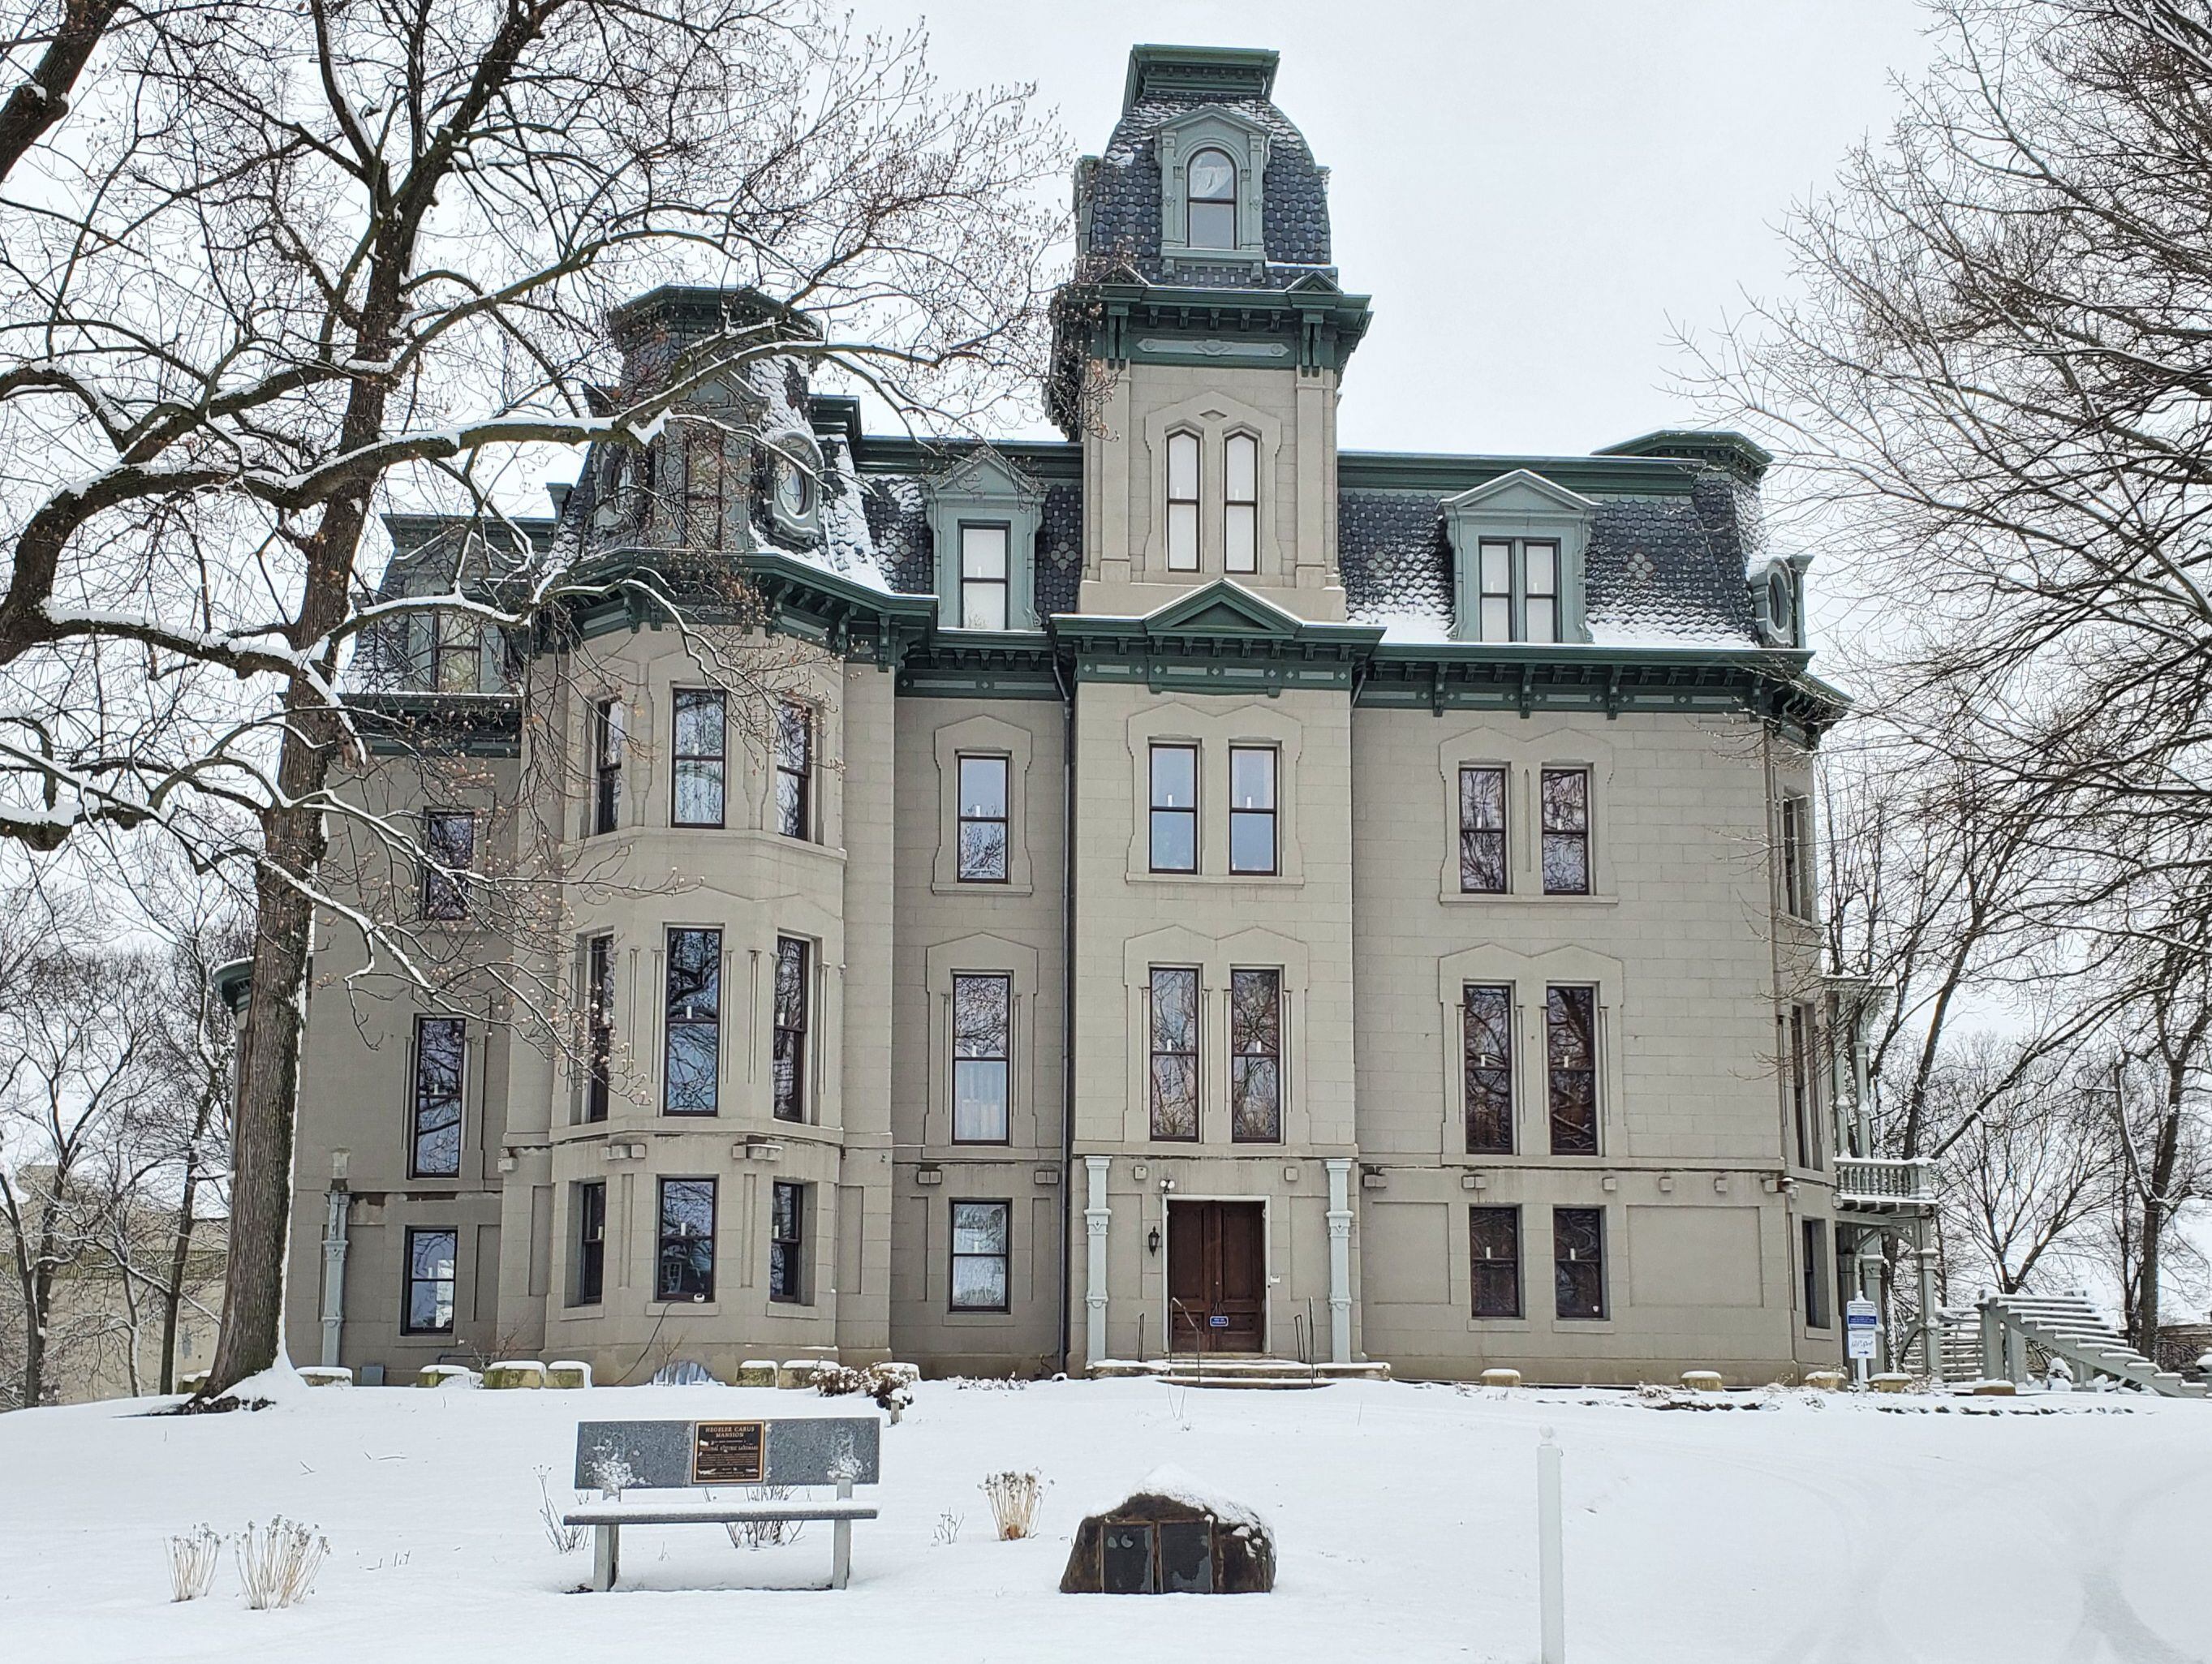 The Hegeler-Carus Mansion in La salle covered in snow.